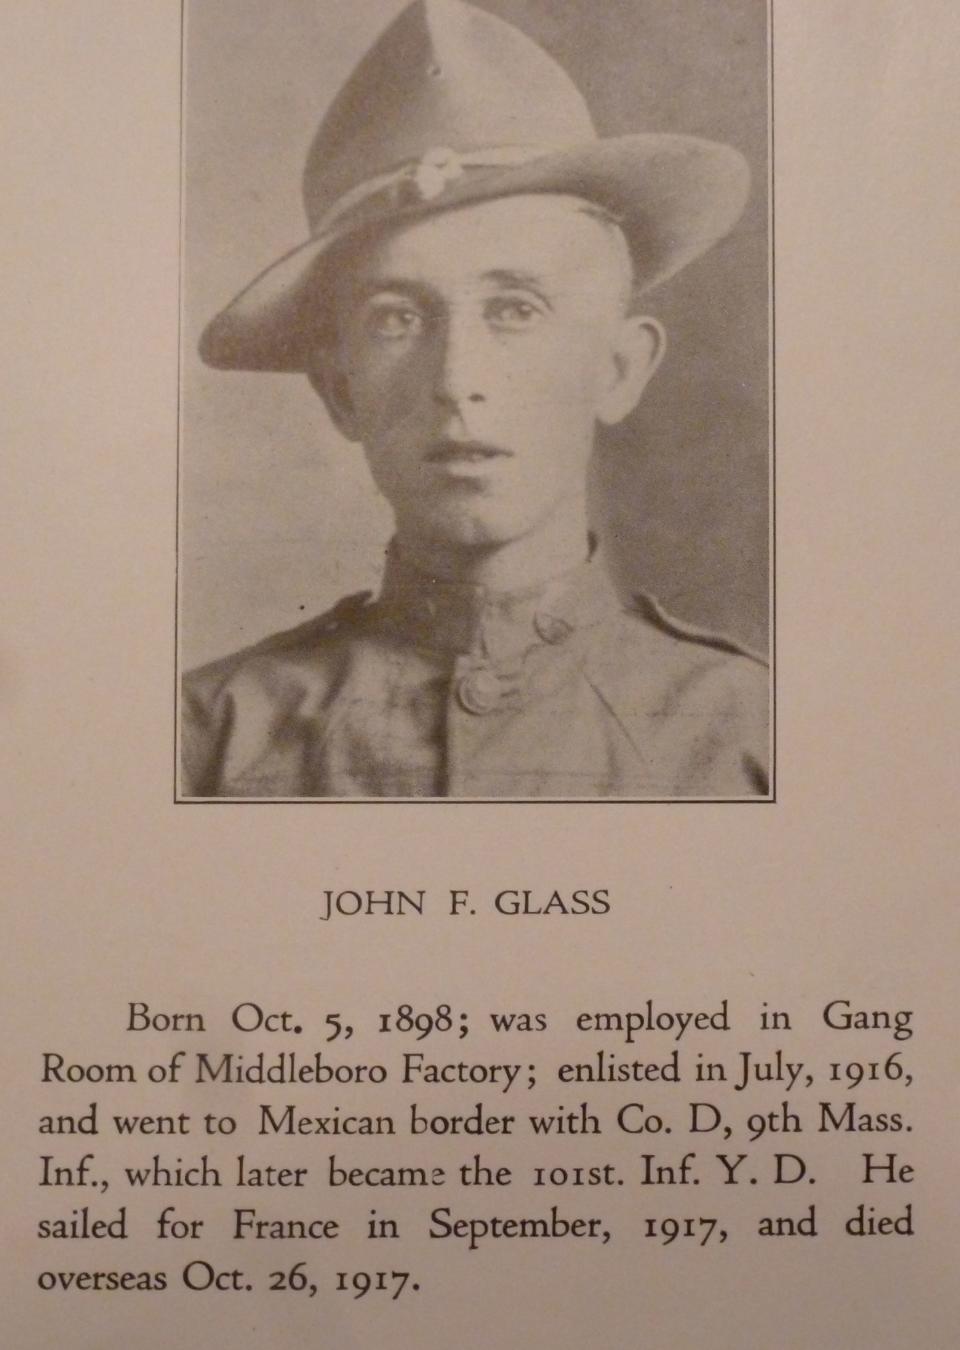 John F. Glass, as seen in a booklet produced by the local George E. Keith shoe firm, which produced the nationally famed "Walk-Over Shoes," highlighting the WW1 military services of their employees.